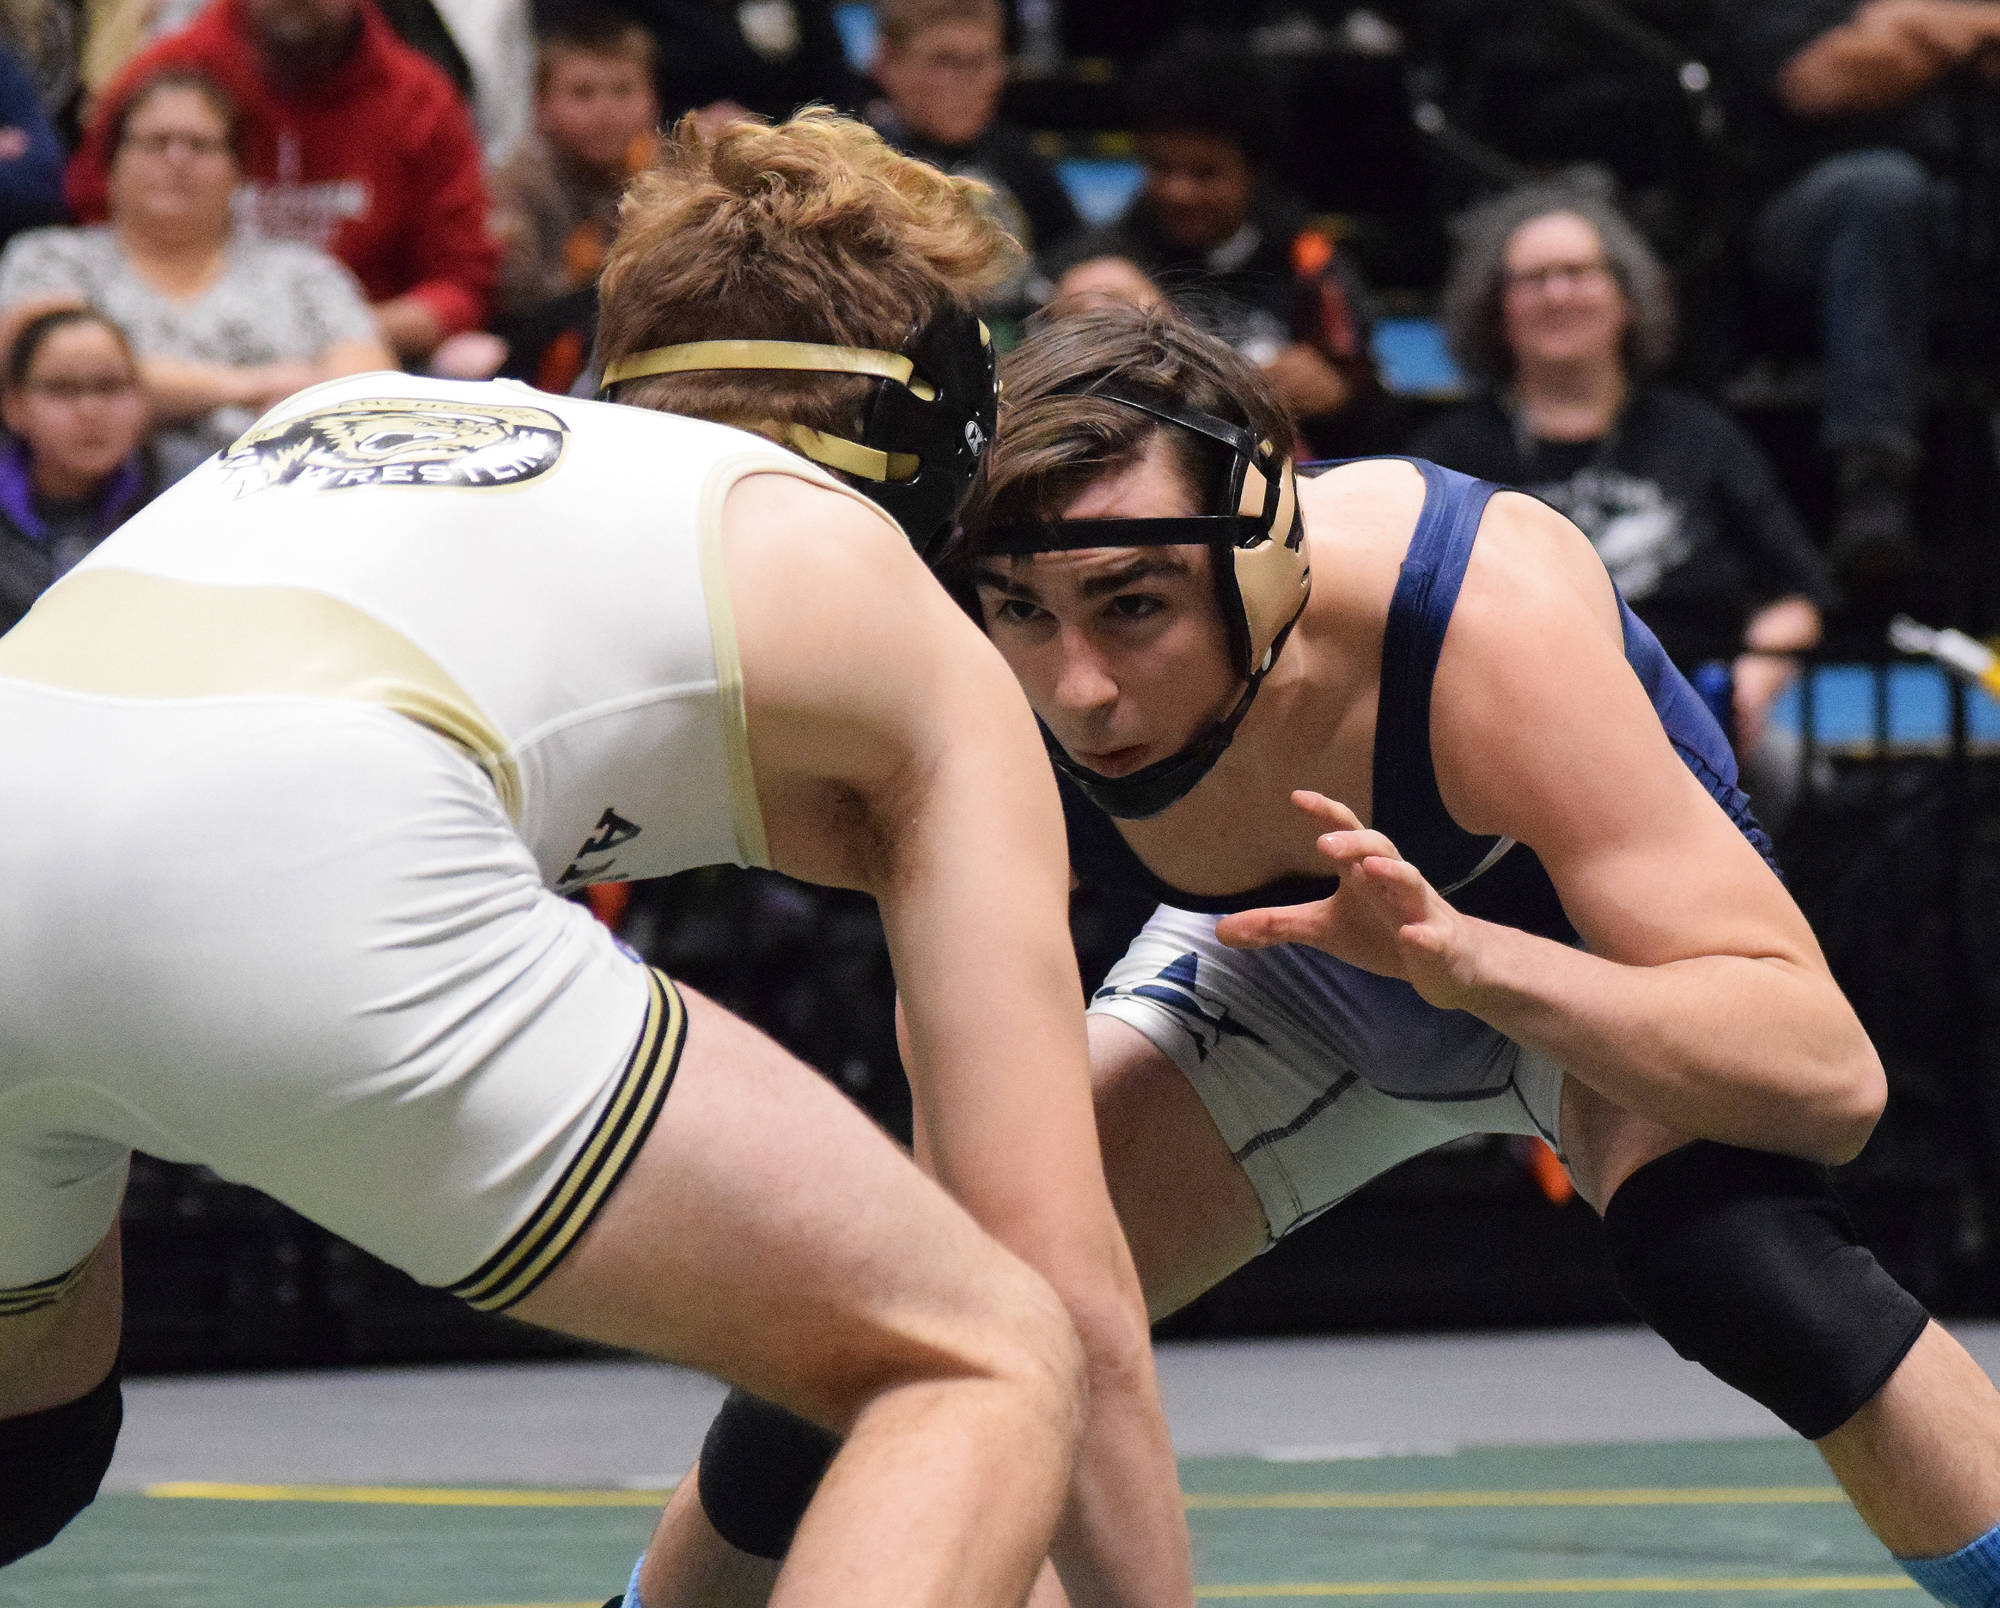 Soldotna senior Gideon Hutchison takes on South’s Jacob Shack in the 130-pound final Saturday, Dec. 15, 2018 at the Div. I state wrestling championships at the Alaska Airlines Center in Anchorage, Alaska. (Photo by Joey Klecka/Peninsula Clarion)